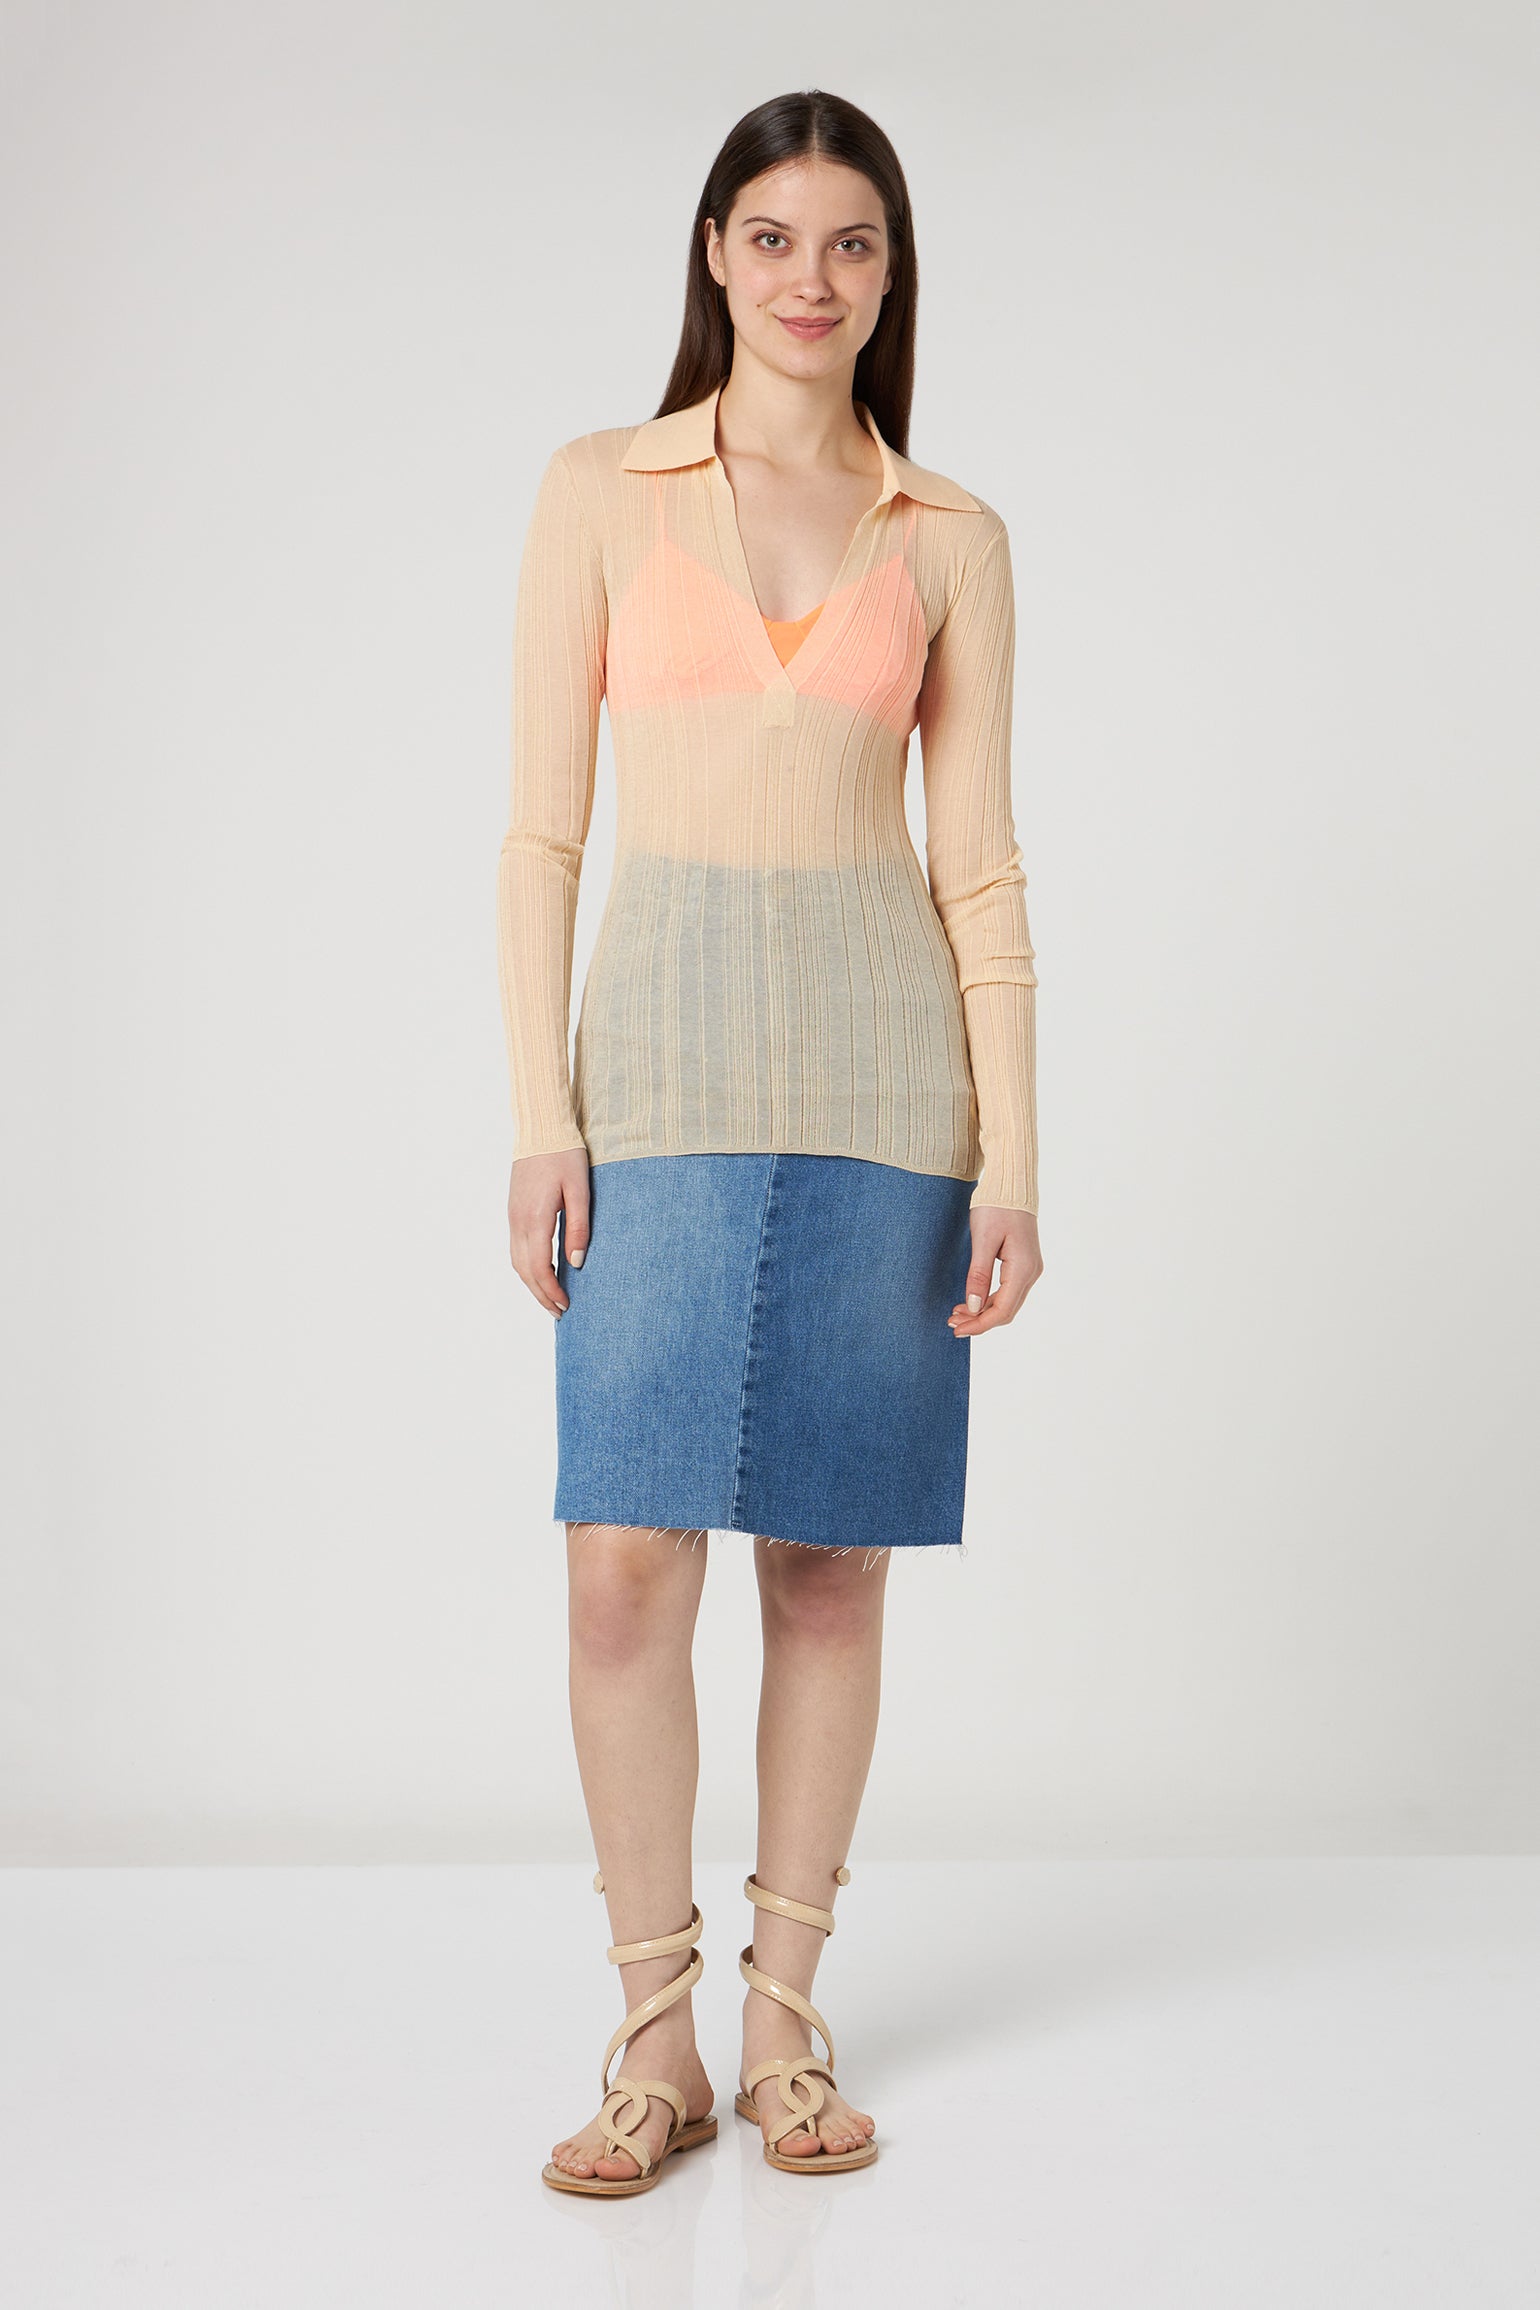 PATRIZIA PEPE Beige Ribbed Sweater with Fluo Top